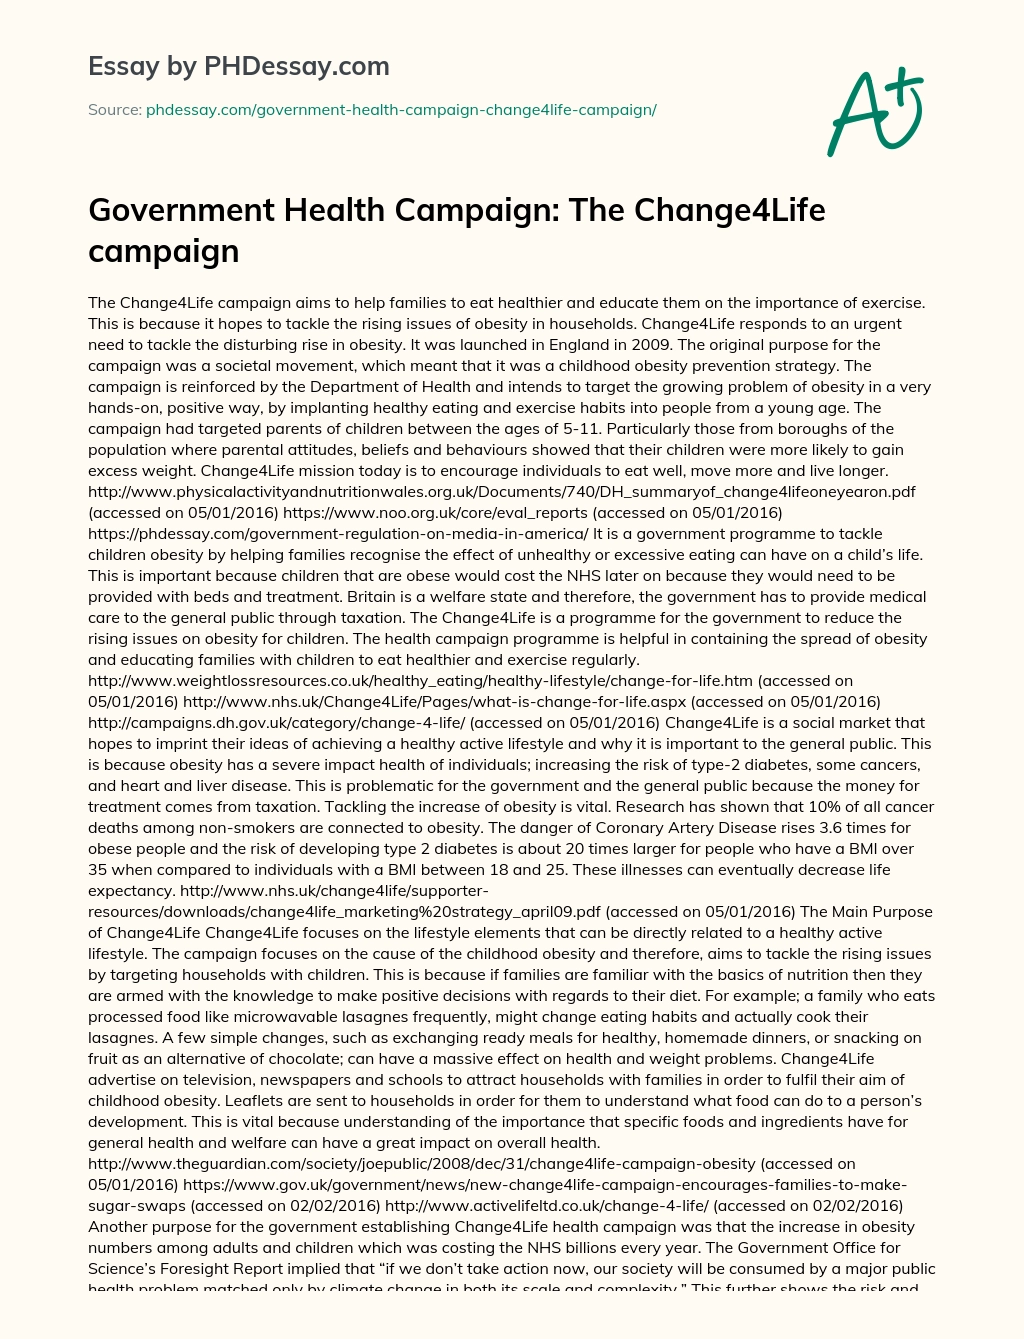 Government Health Campaign: The Change4Life campaign essay